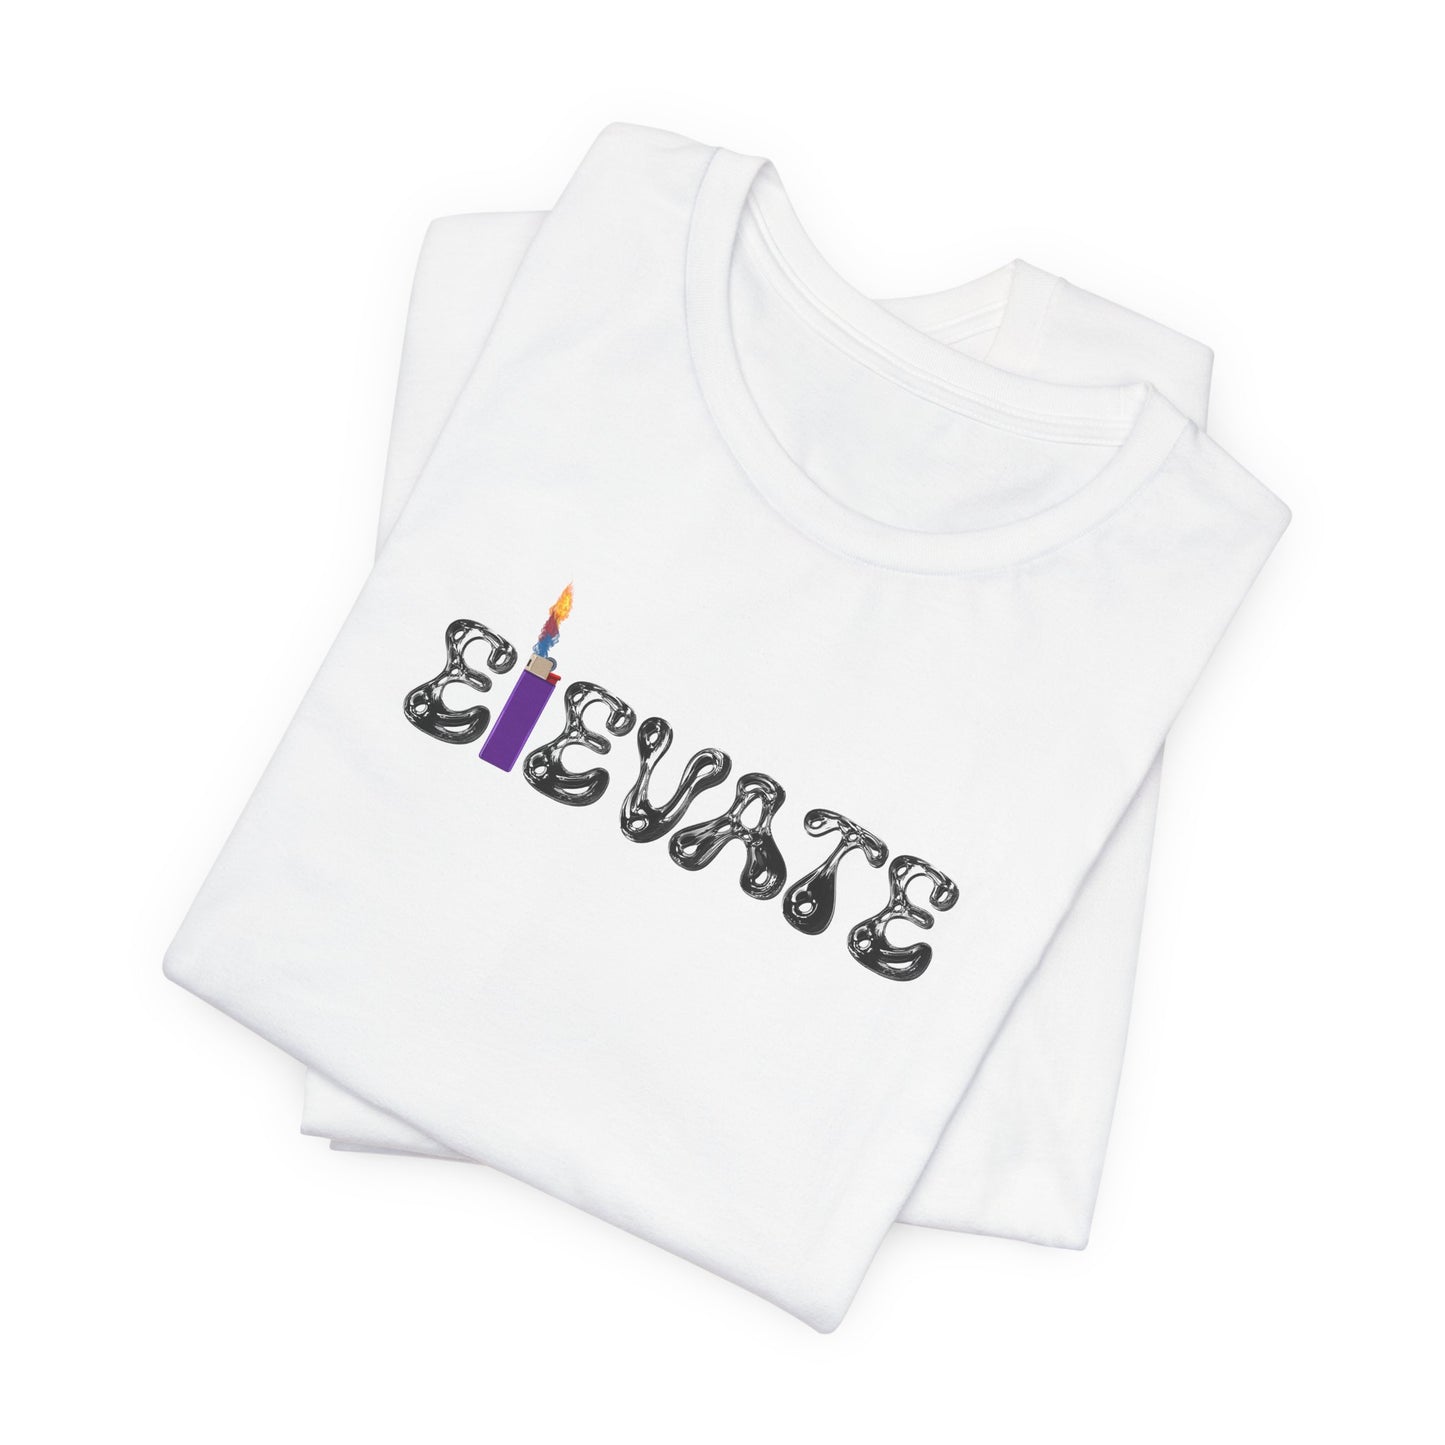 "CHROME ON FIRE" Graphic T-Shirt